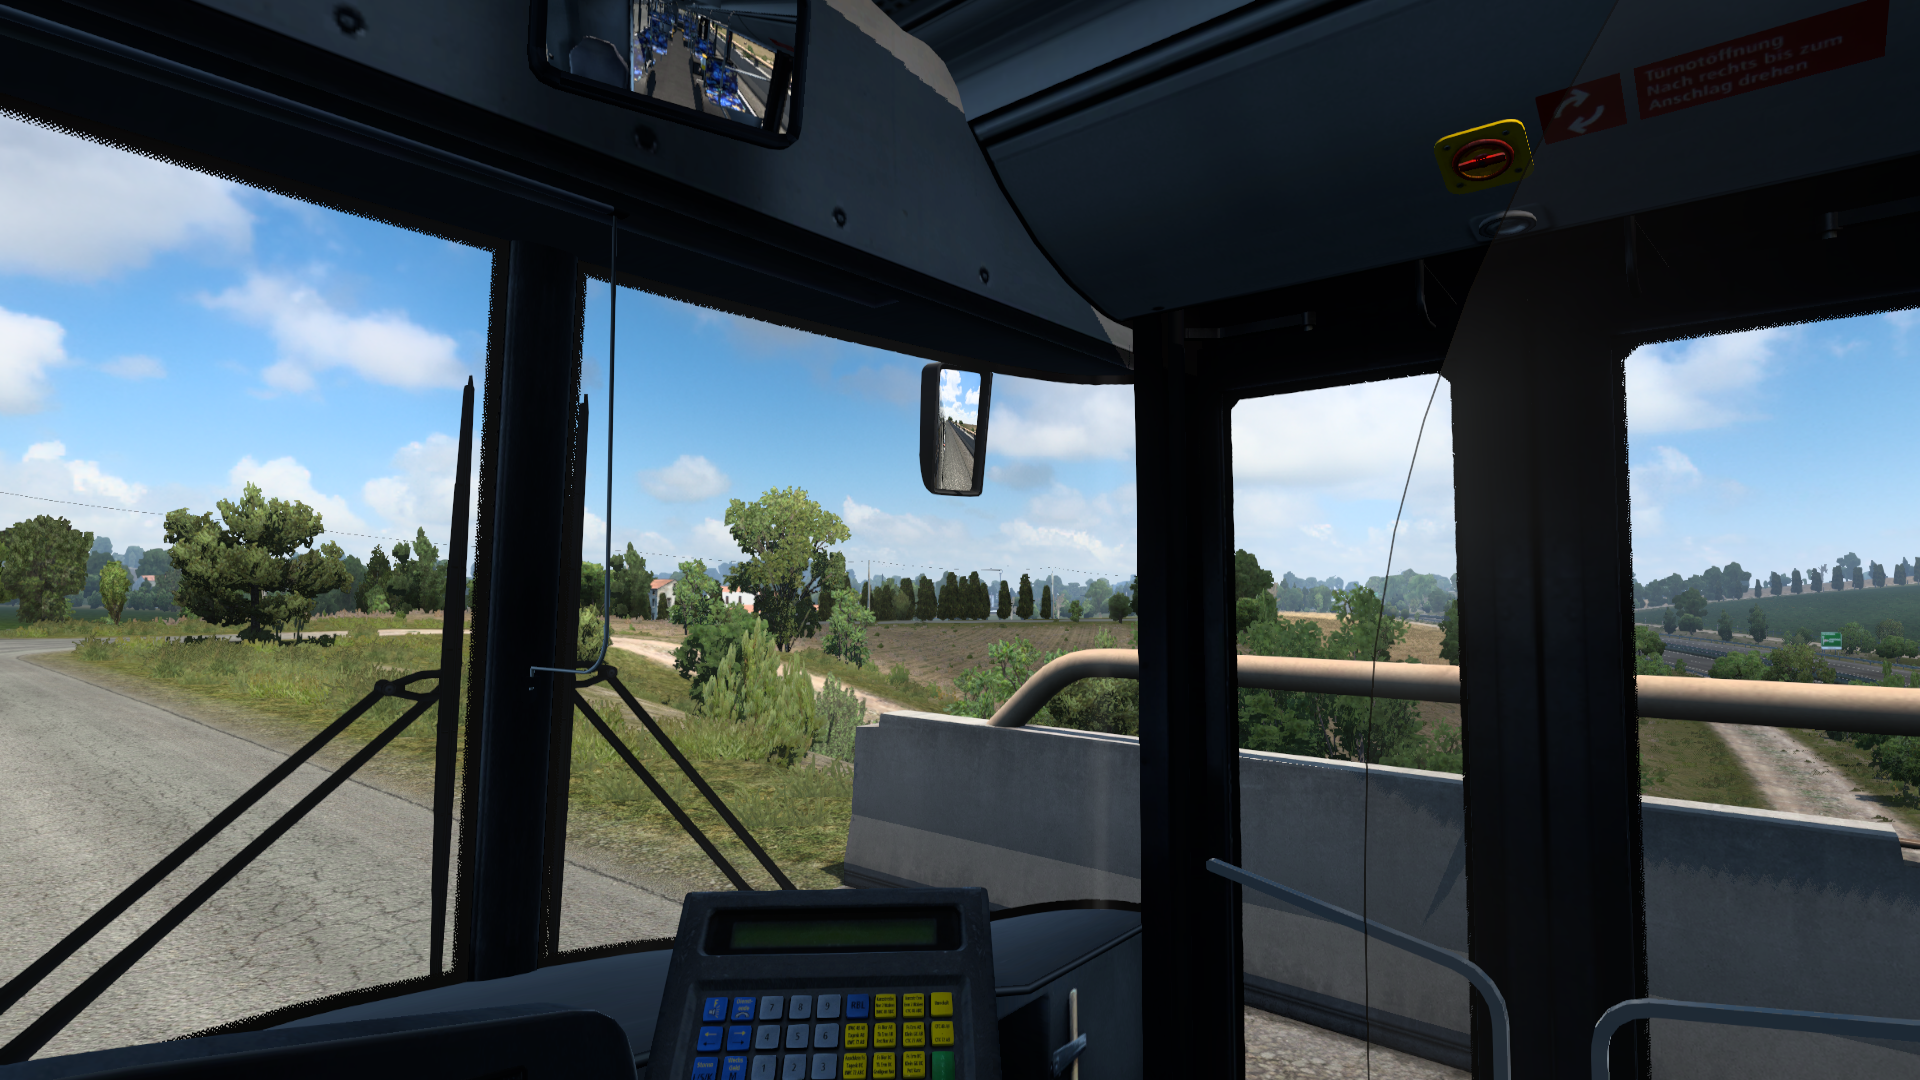 ets2_20211115_212346_00.png